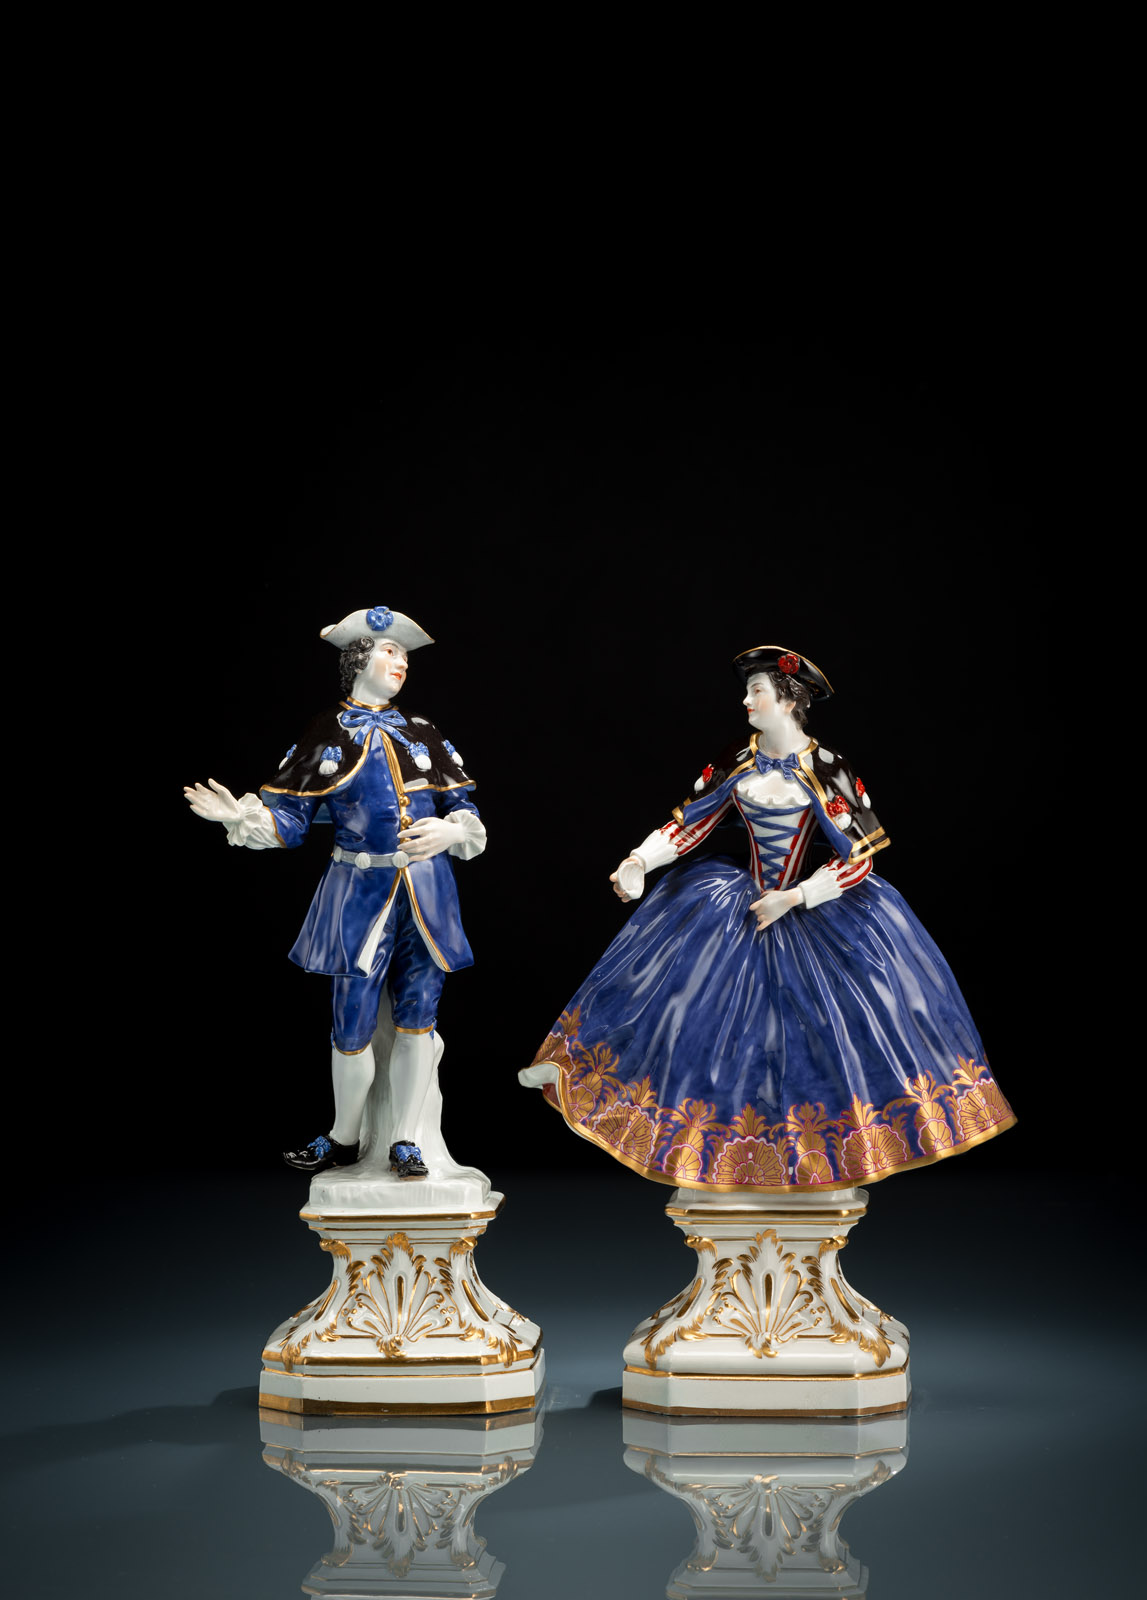 A lady and a gentleman on foliage tooled bases, with pilgrim mussels on their coats, she holds another pilgrim mussle in her hand. Models by Johann J. Kaendler in 1744. Blue sword marks, model no. 680 and 680x. Minor restoration.